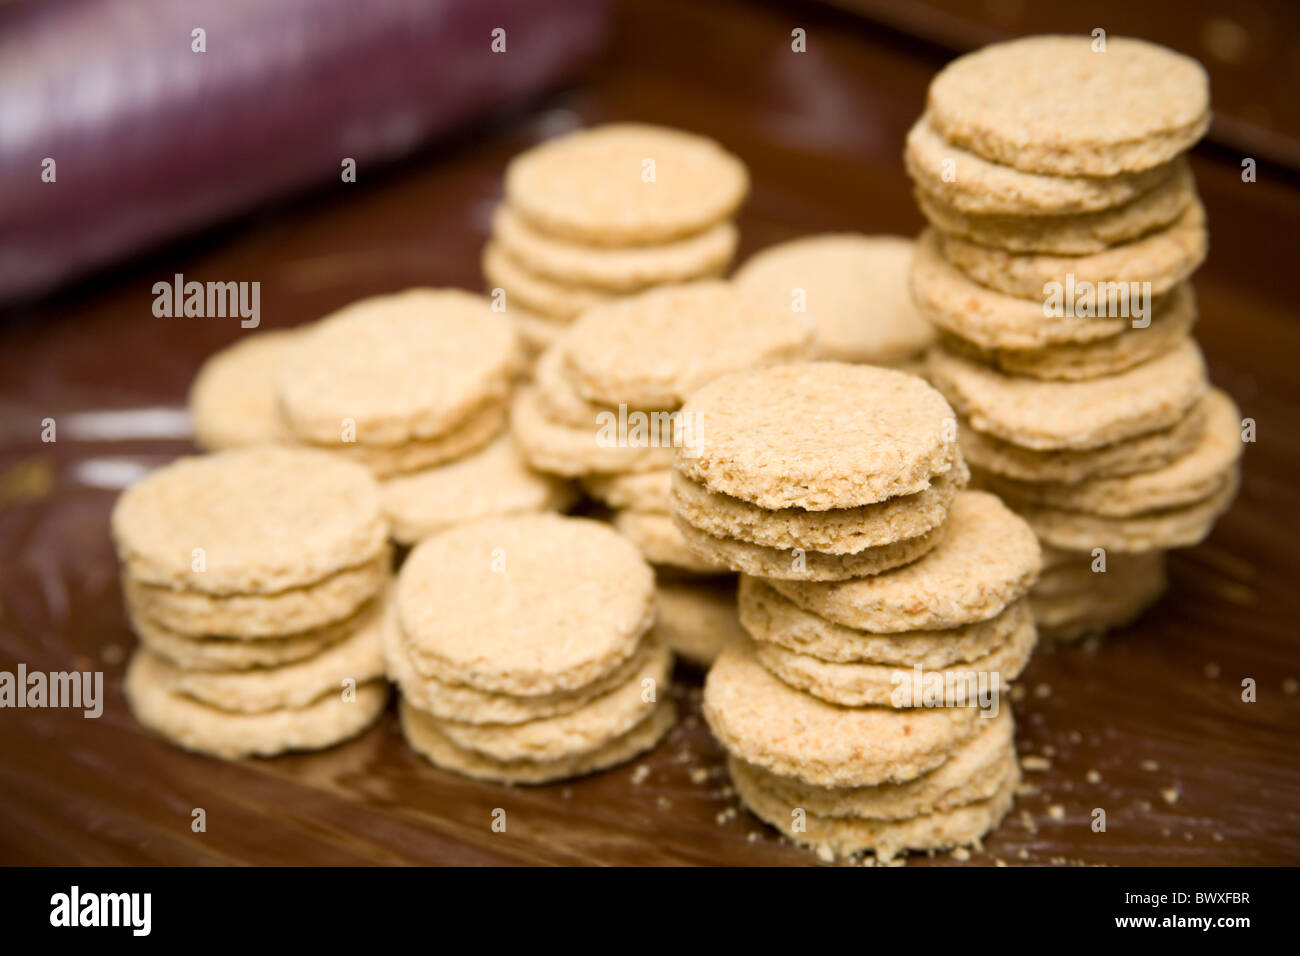 Stacks of home made oatcakes. Stock Photo